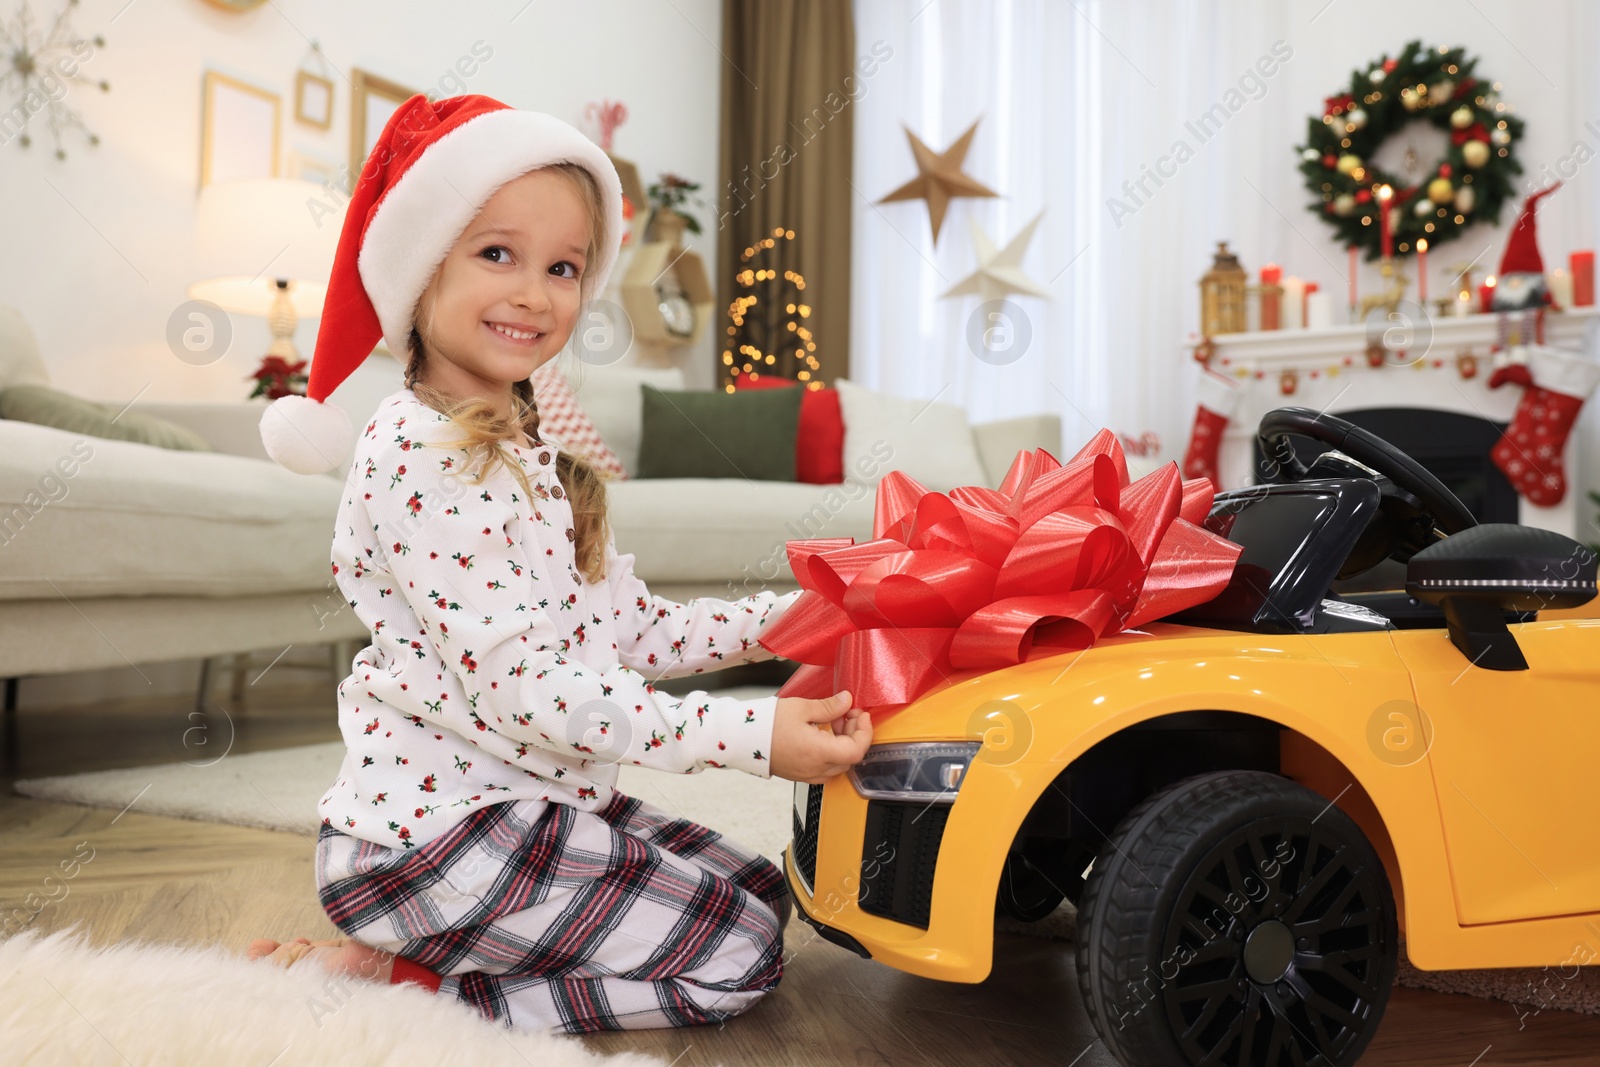 Photo of Cute little girl near toy car with big red bow in room decorated for Christmas